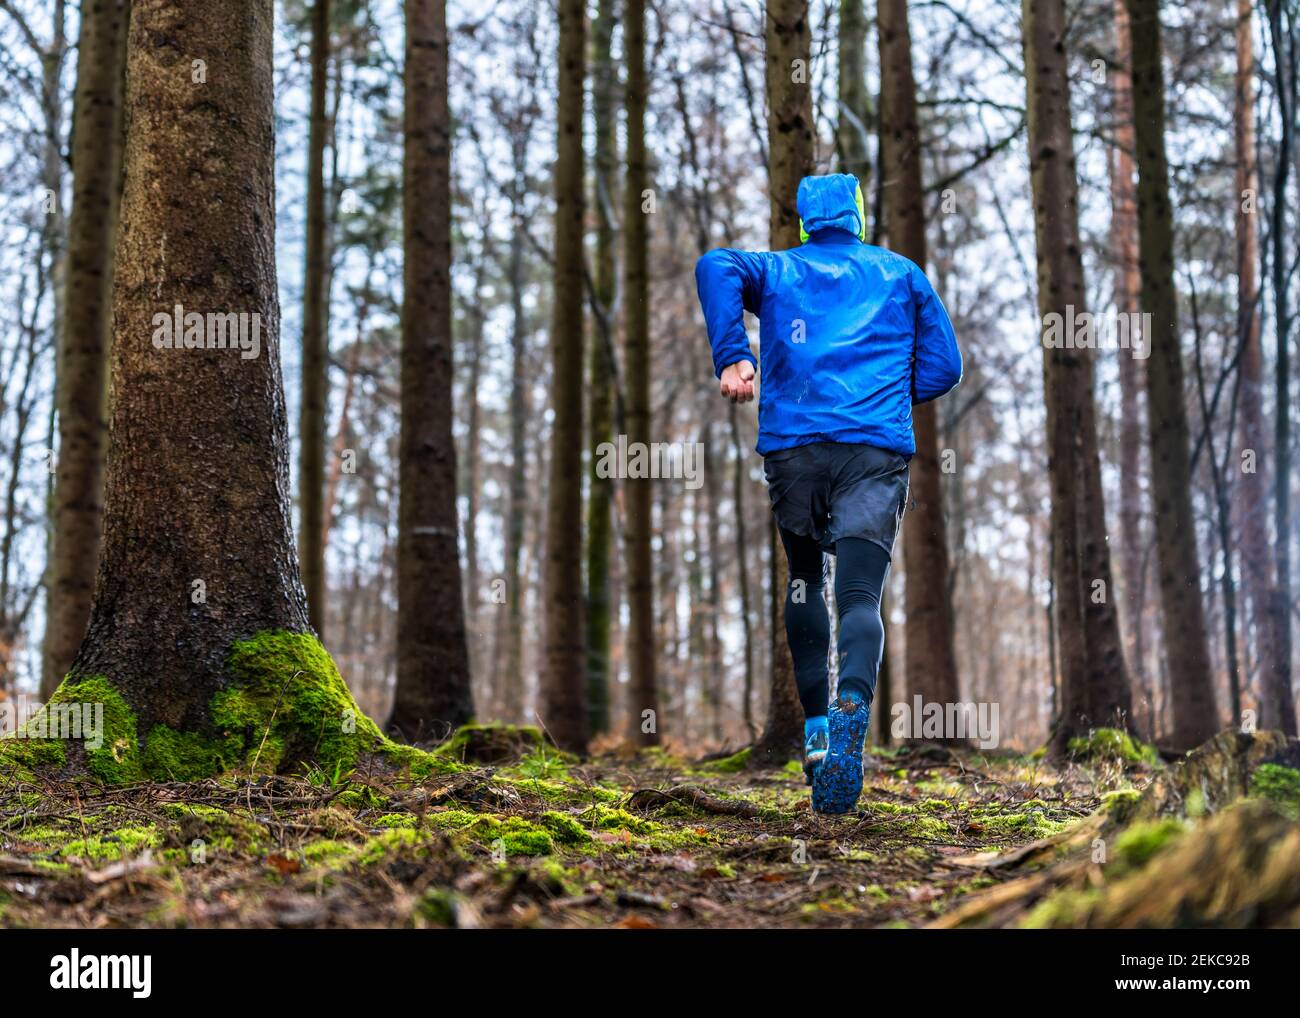 Male jogger with blue jacket running in forest Stock Photo - Alamy